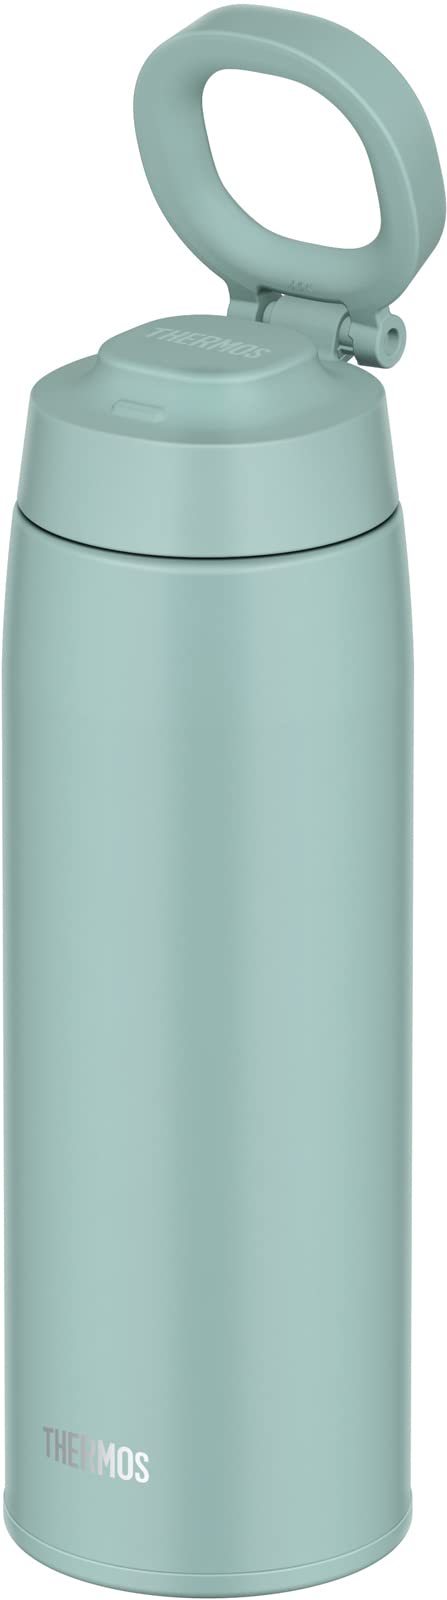 Thermos Water Bottle Vacuum Insulated Mobile Mug with Carry Loop 750ml JOO-750MG_1